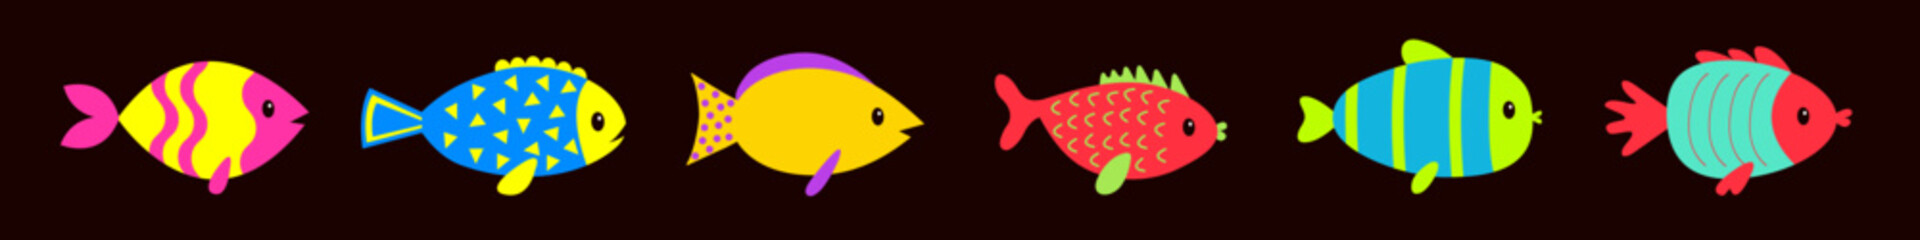 Fish icon set line. Marine life. Cartoon cute kawaii funny baby character. Colorful brightly aquarium sea ocean animals. Kids collection. Childish style. Isolated. Black background. Flat design Vector